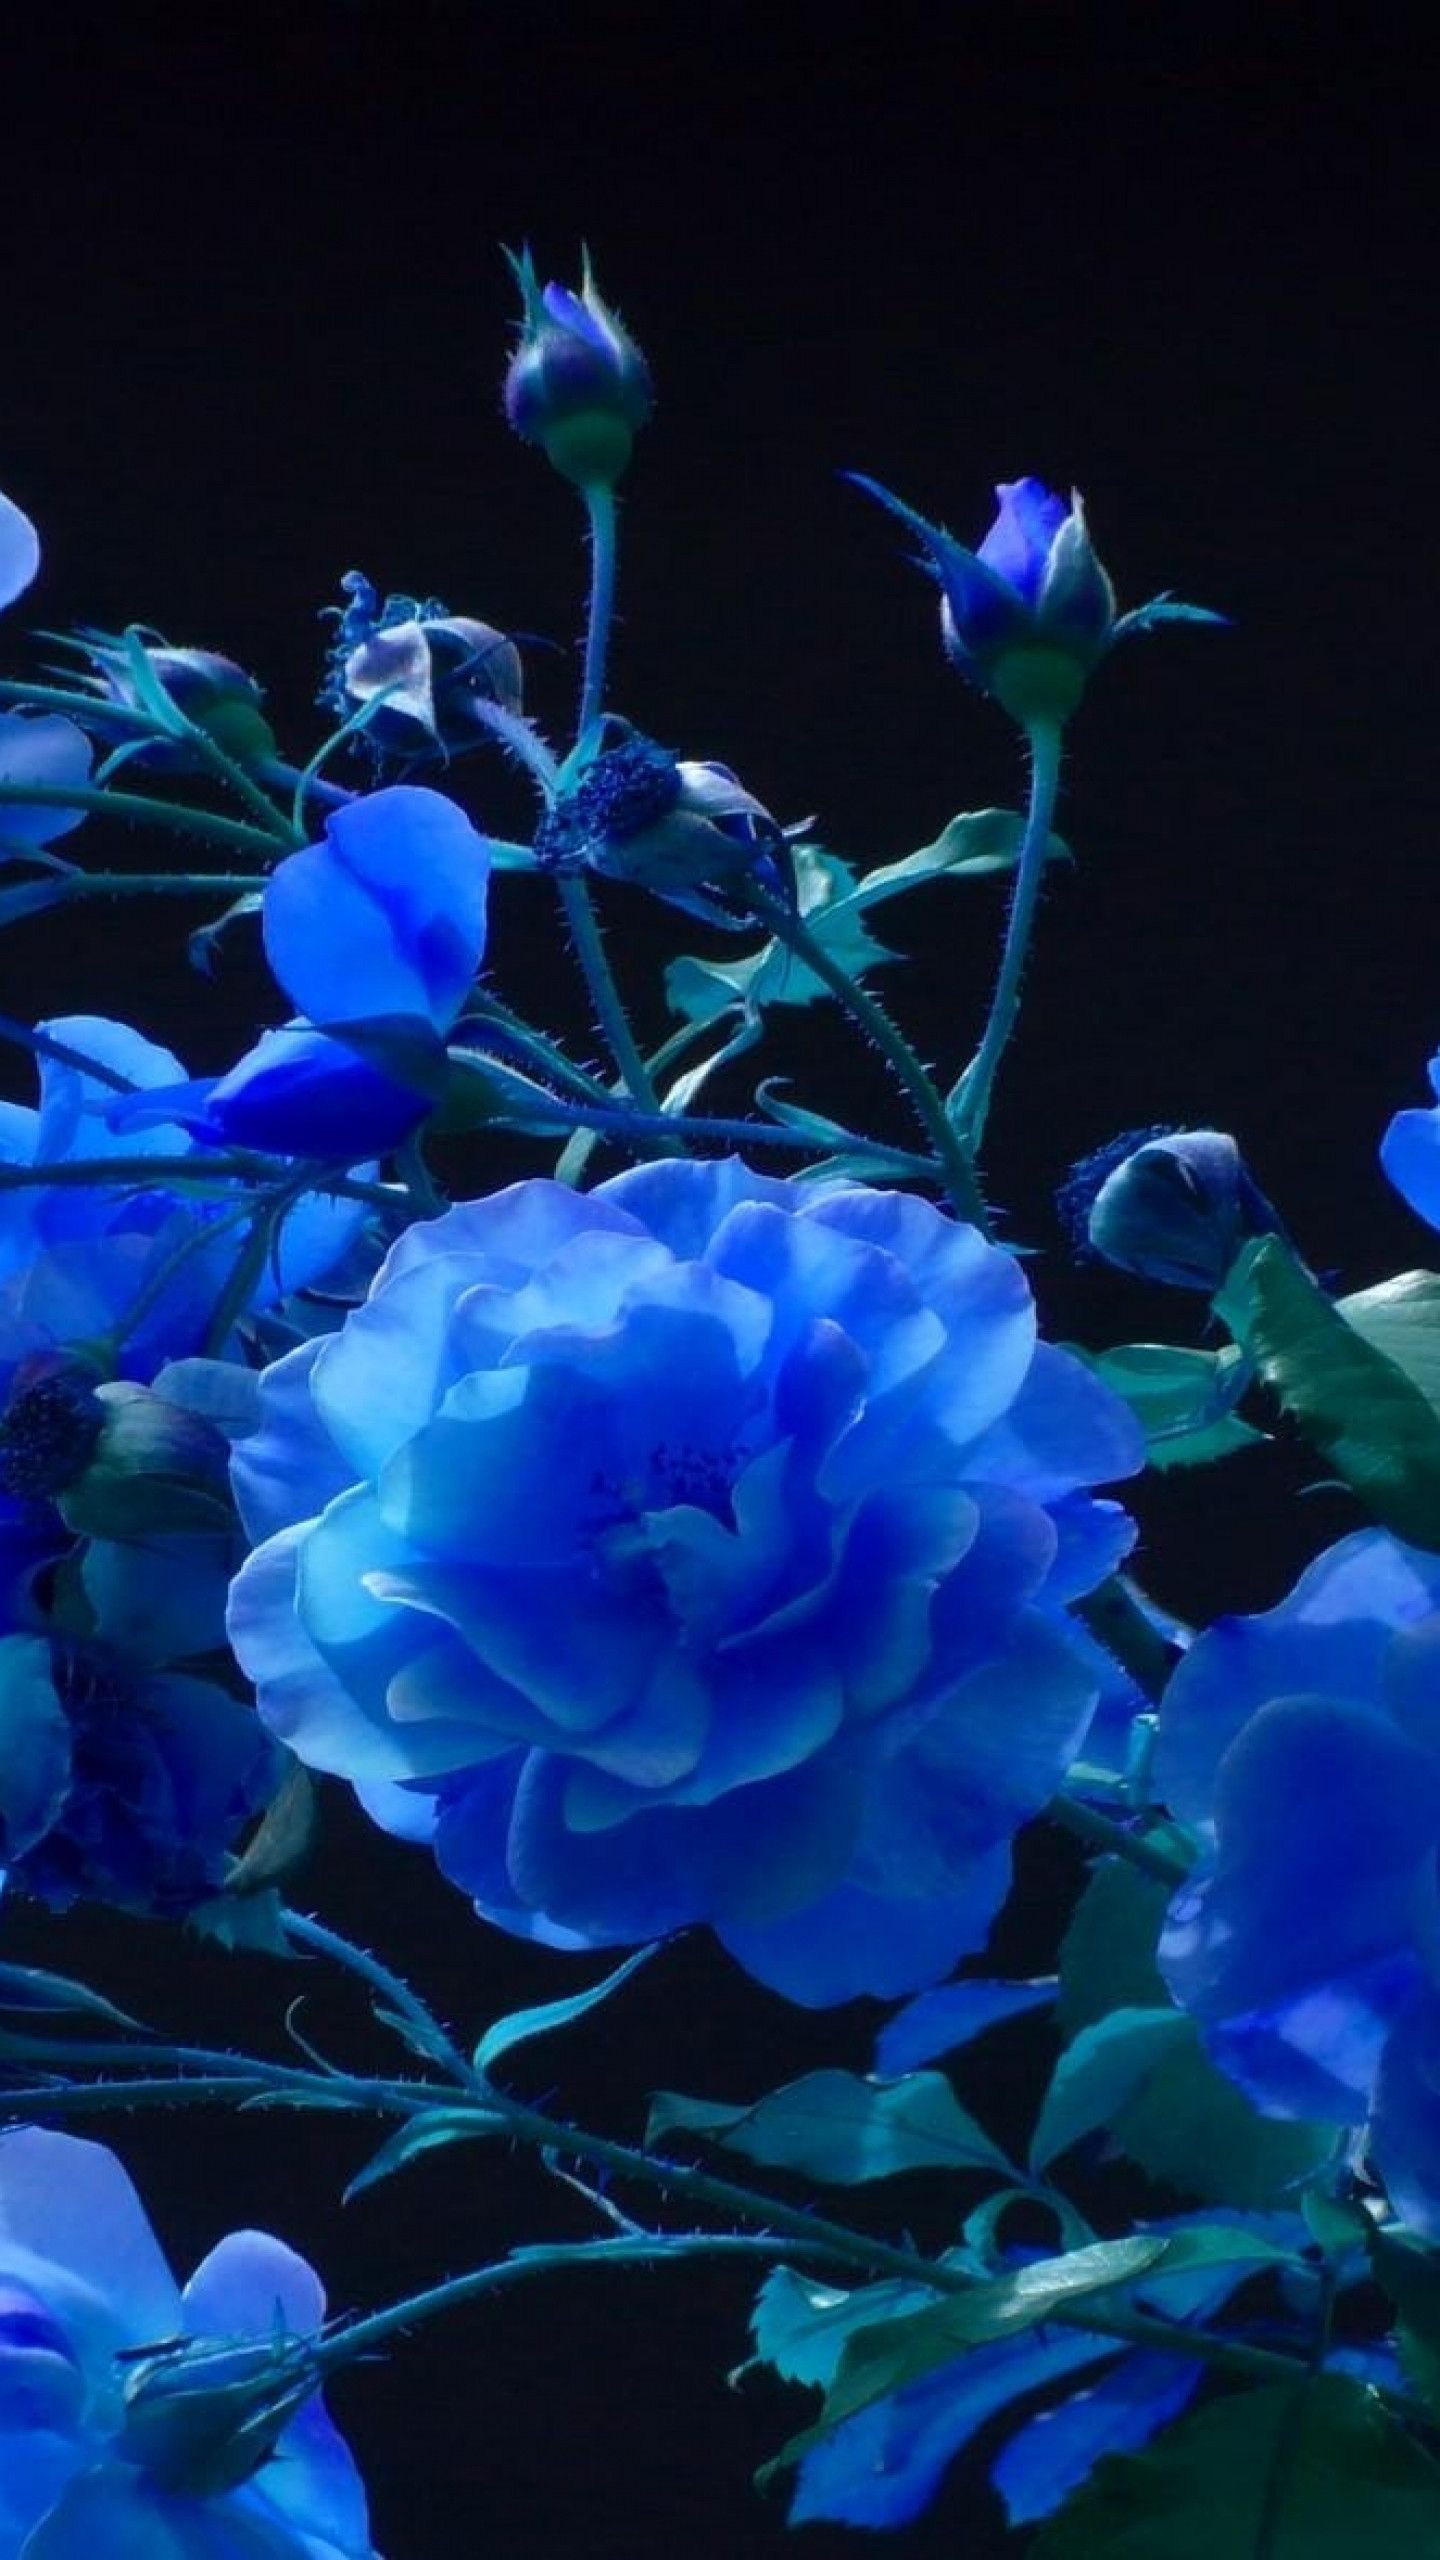 Dark Blue Rose Abstract Wallpapers